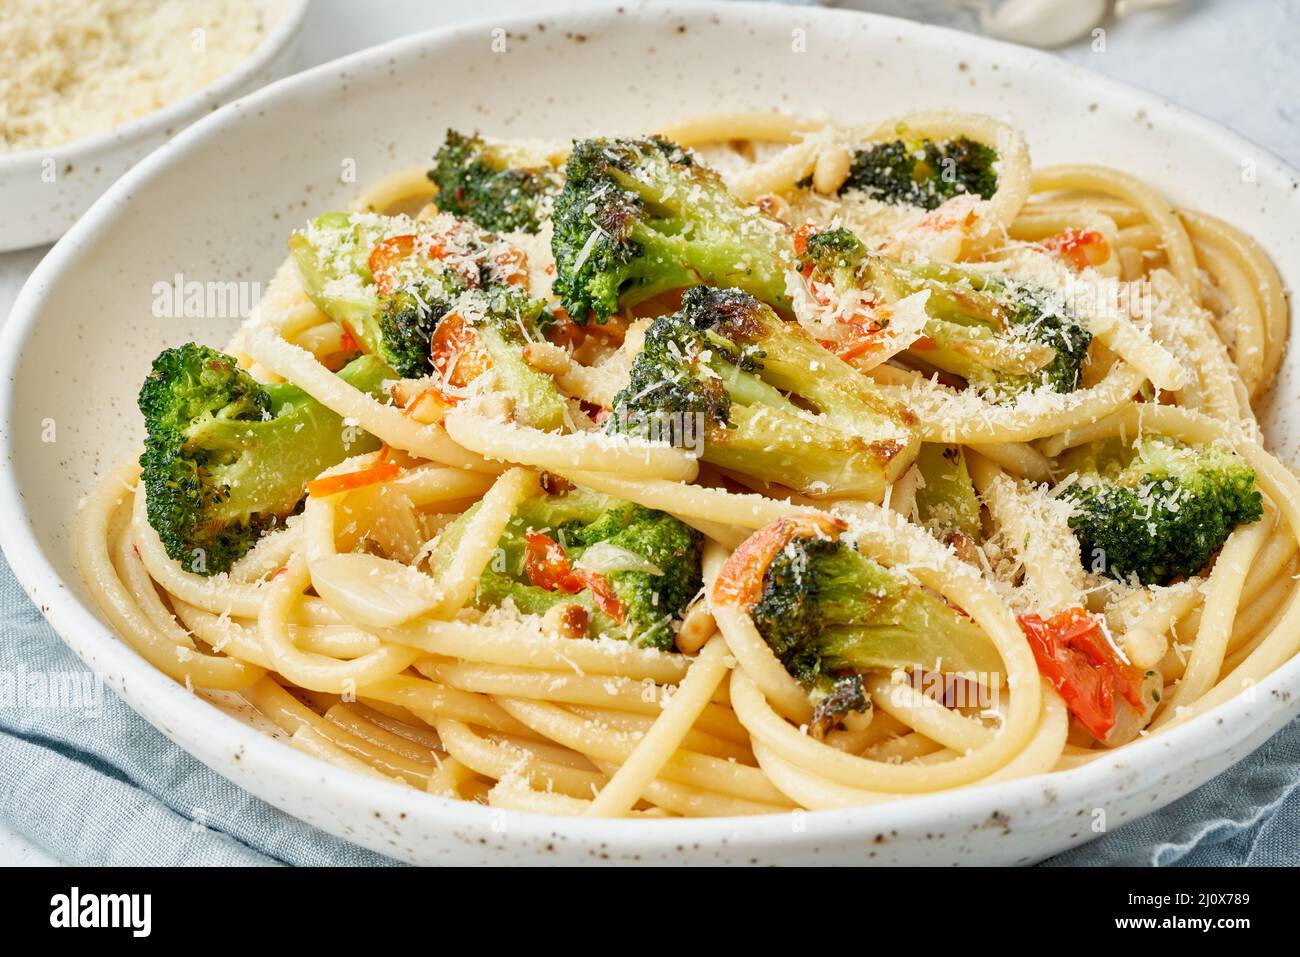 Spaghetti pasta with broccoli, bucatini with pine nuts. Food for vegans, vegetarians Stock Photo